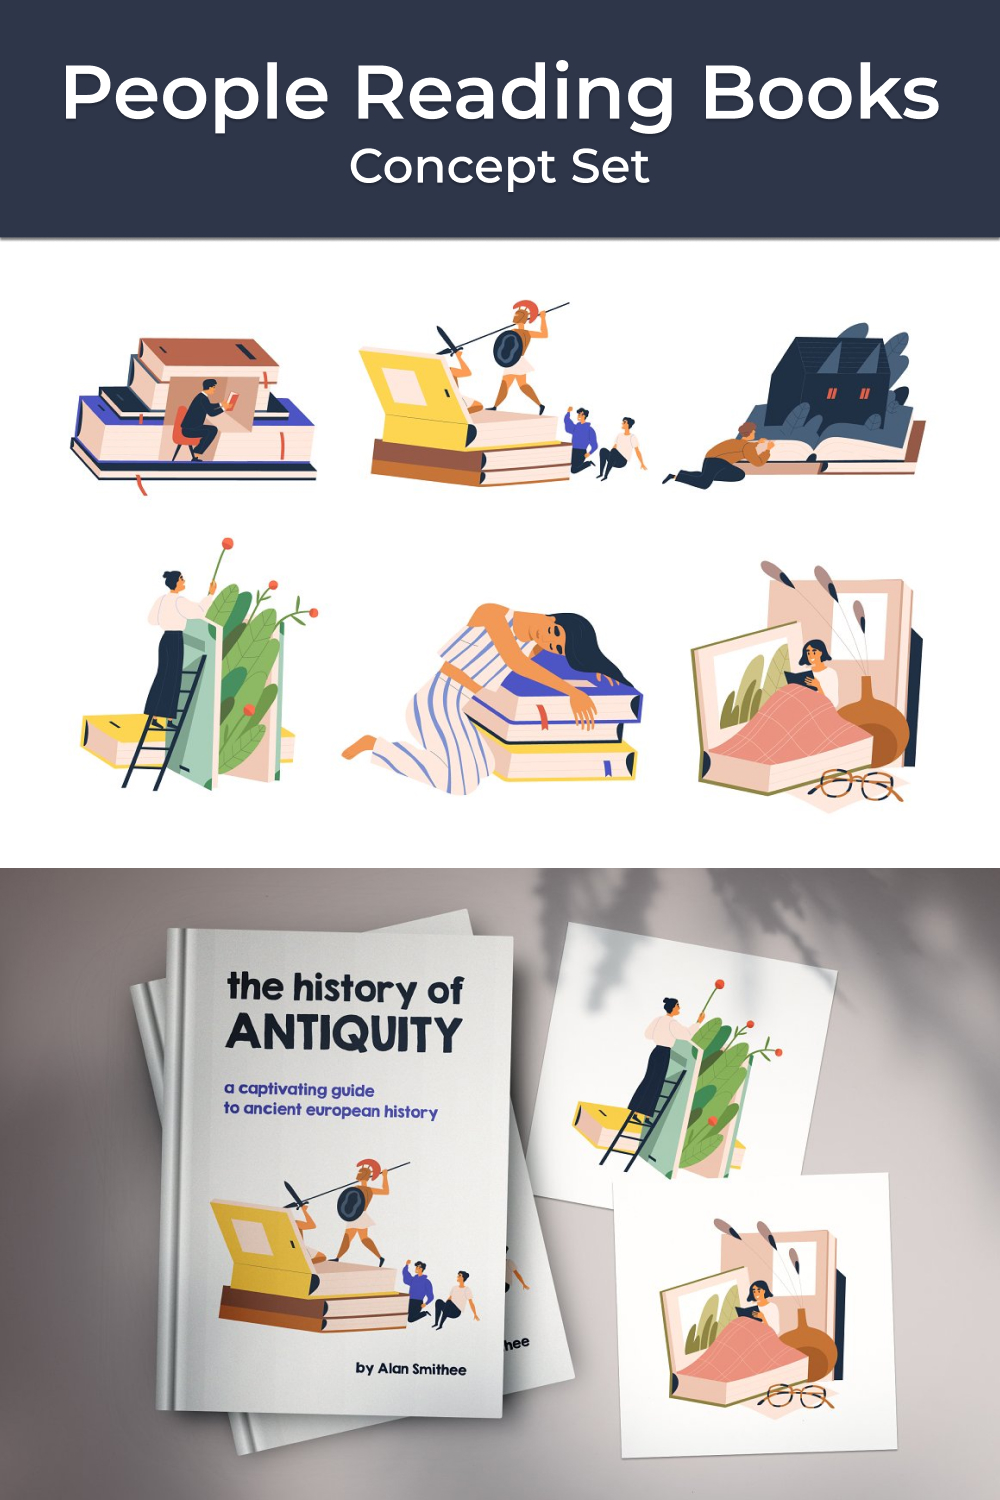 Illustrations of people reading books concept set.